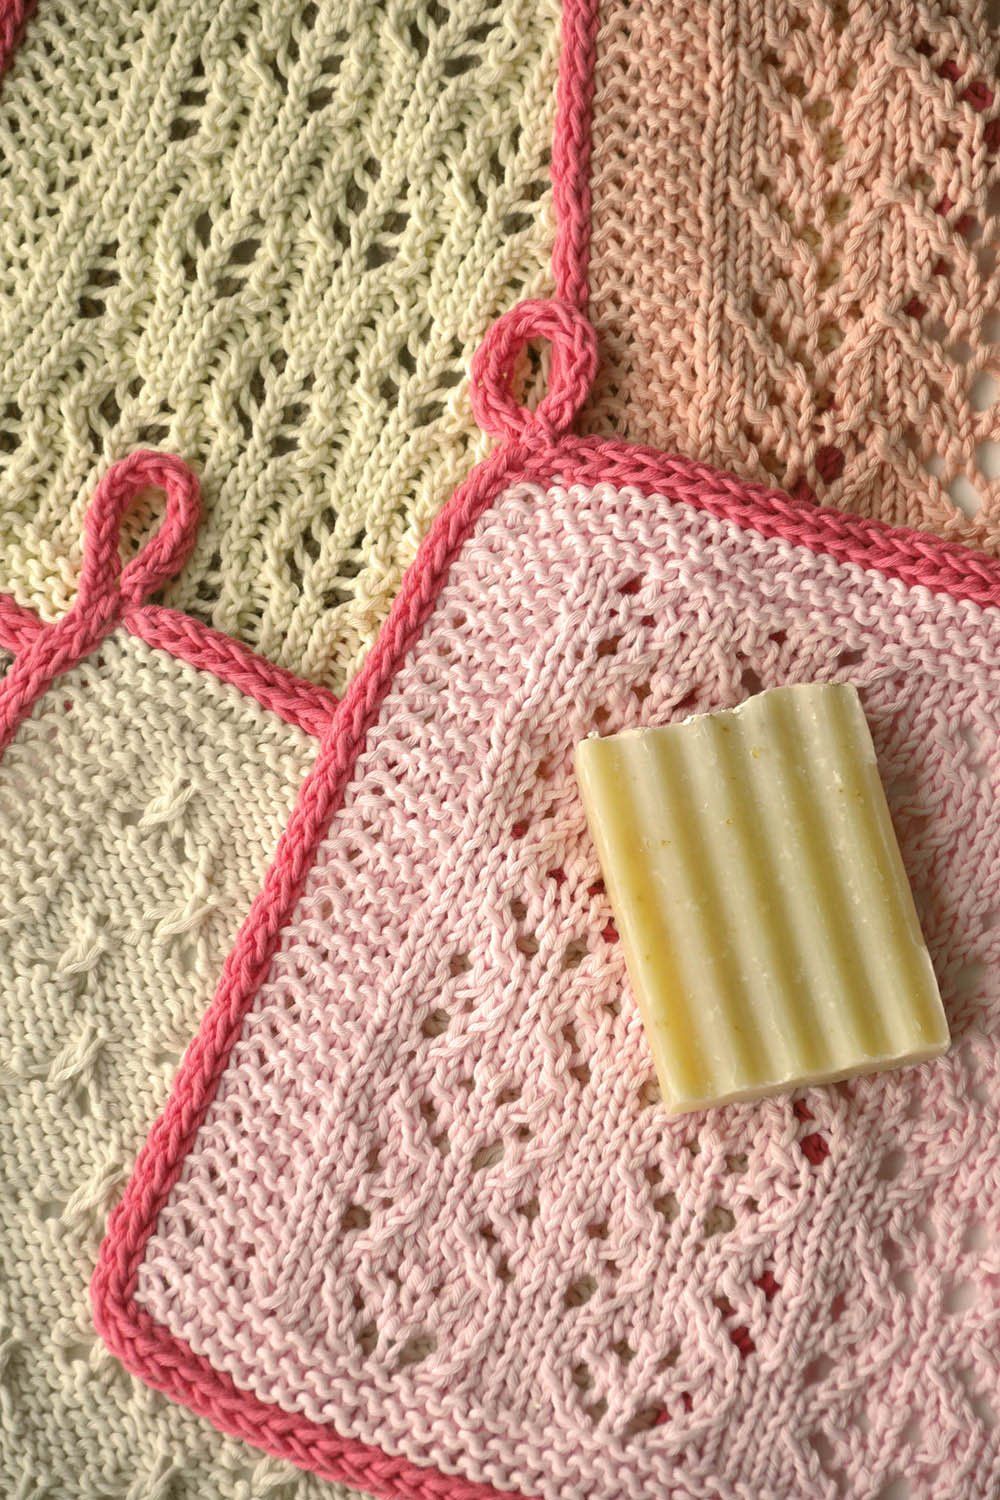 Knitted Cotton Dishcloths Pattern — Wild & Woolly Yarns